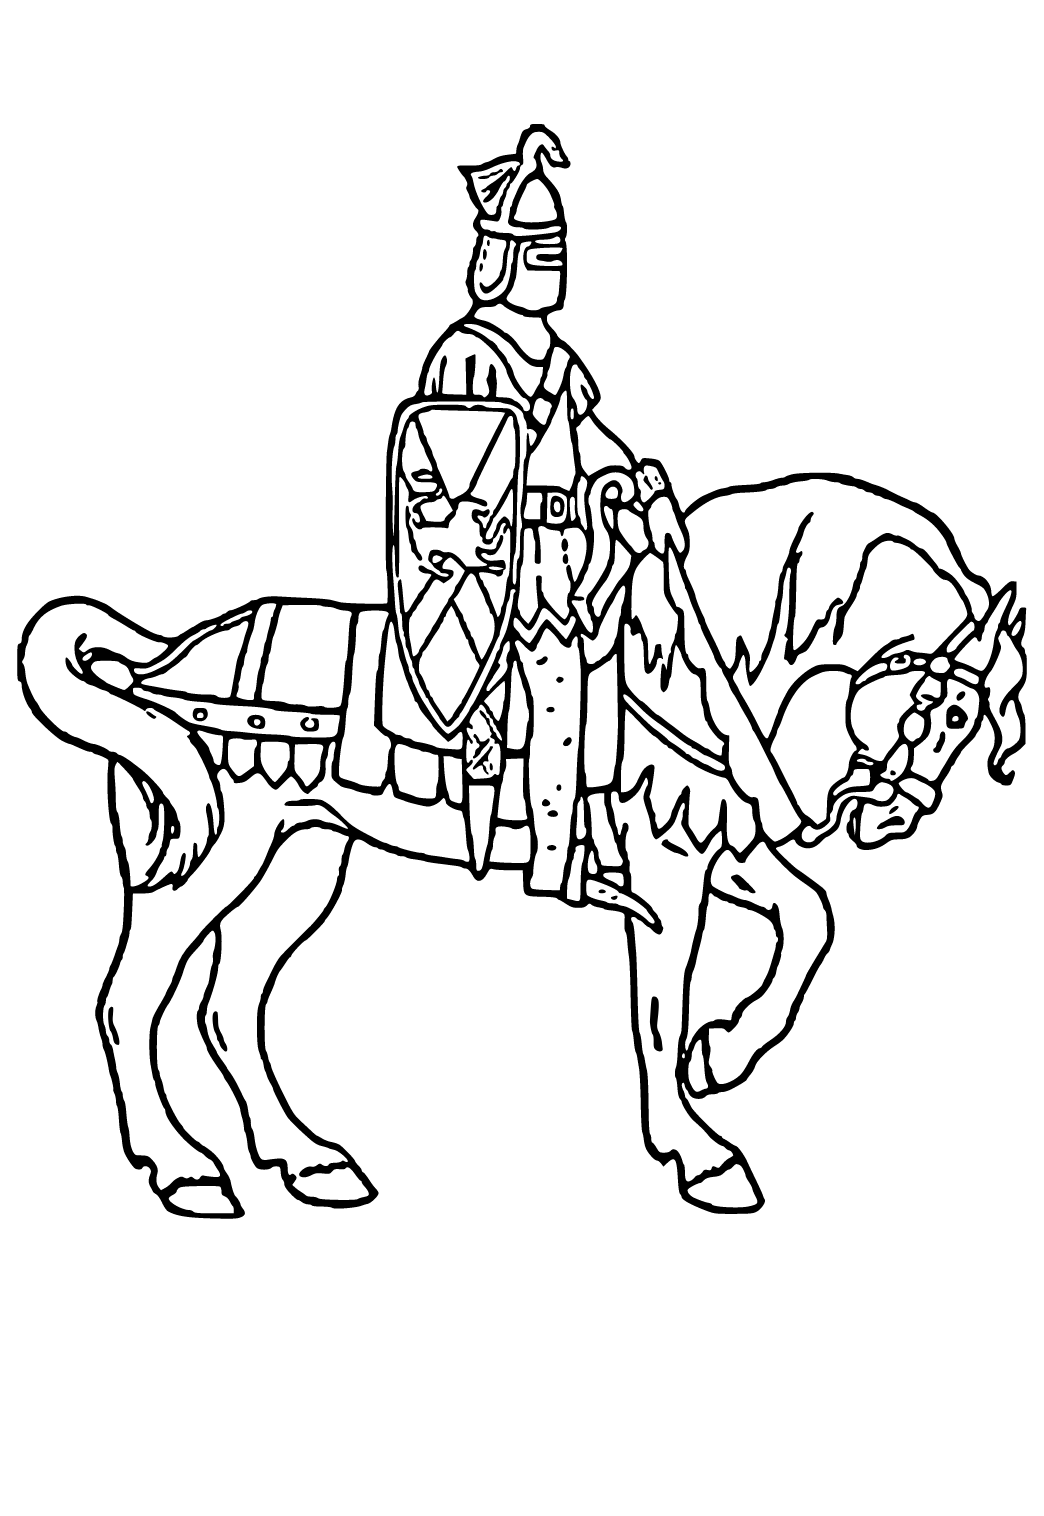 Knight Rider Coloring Pages